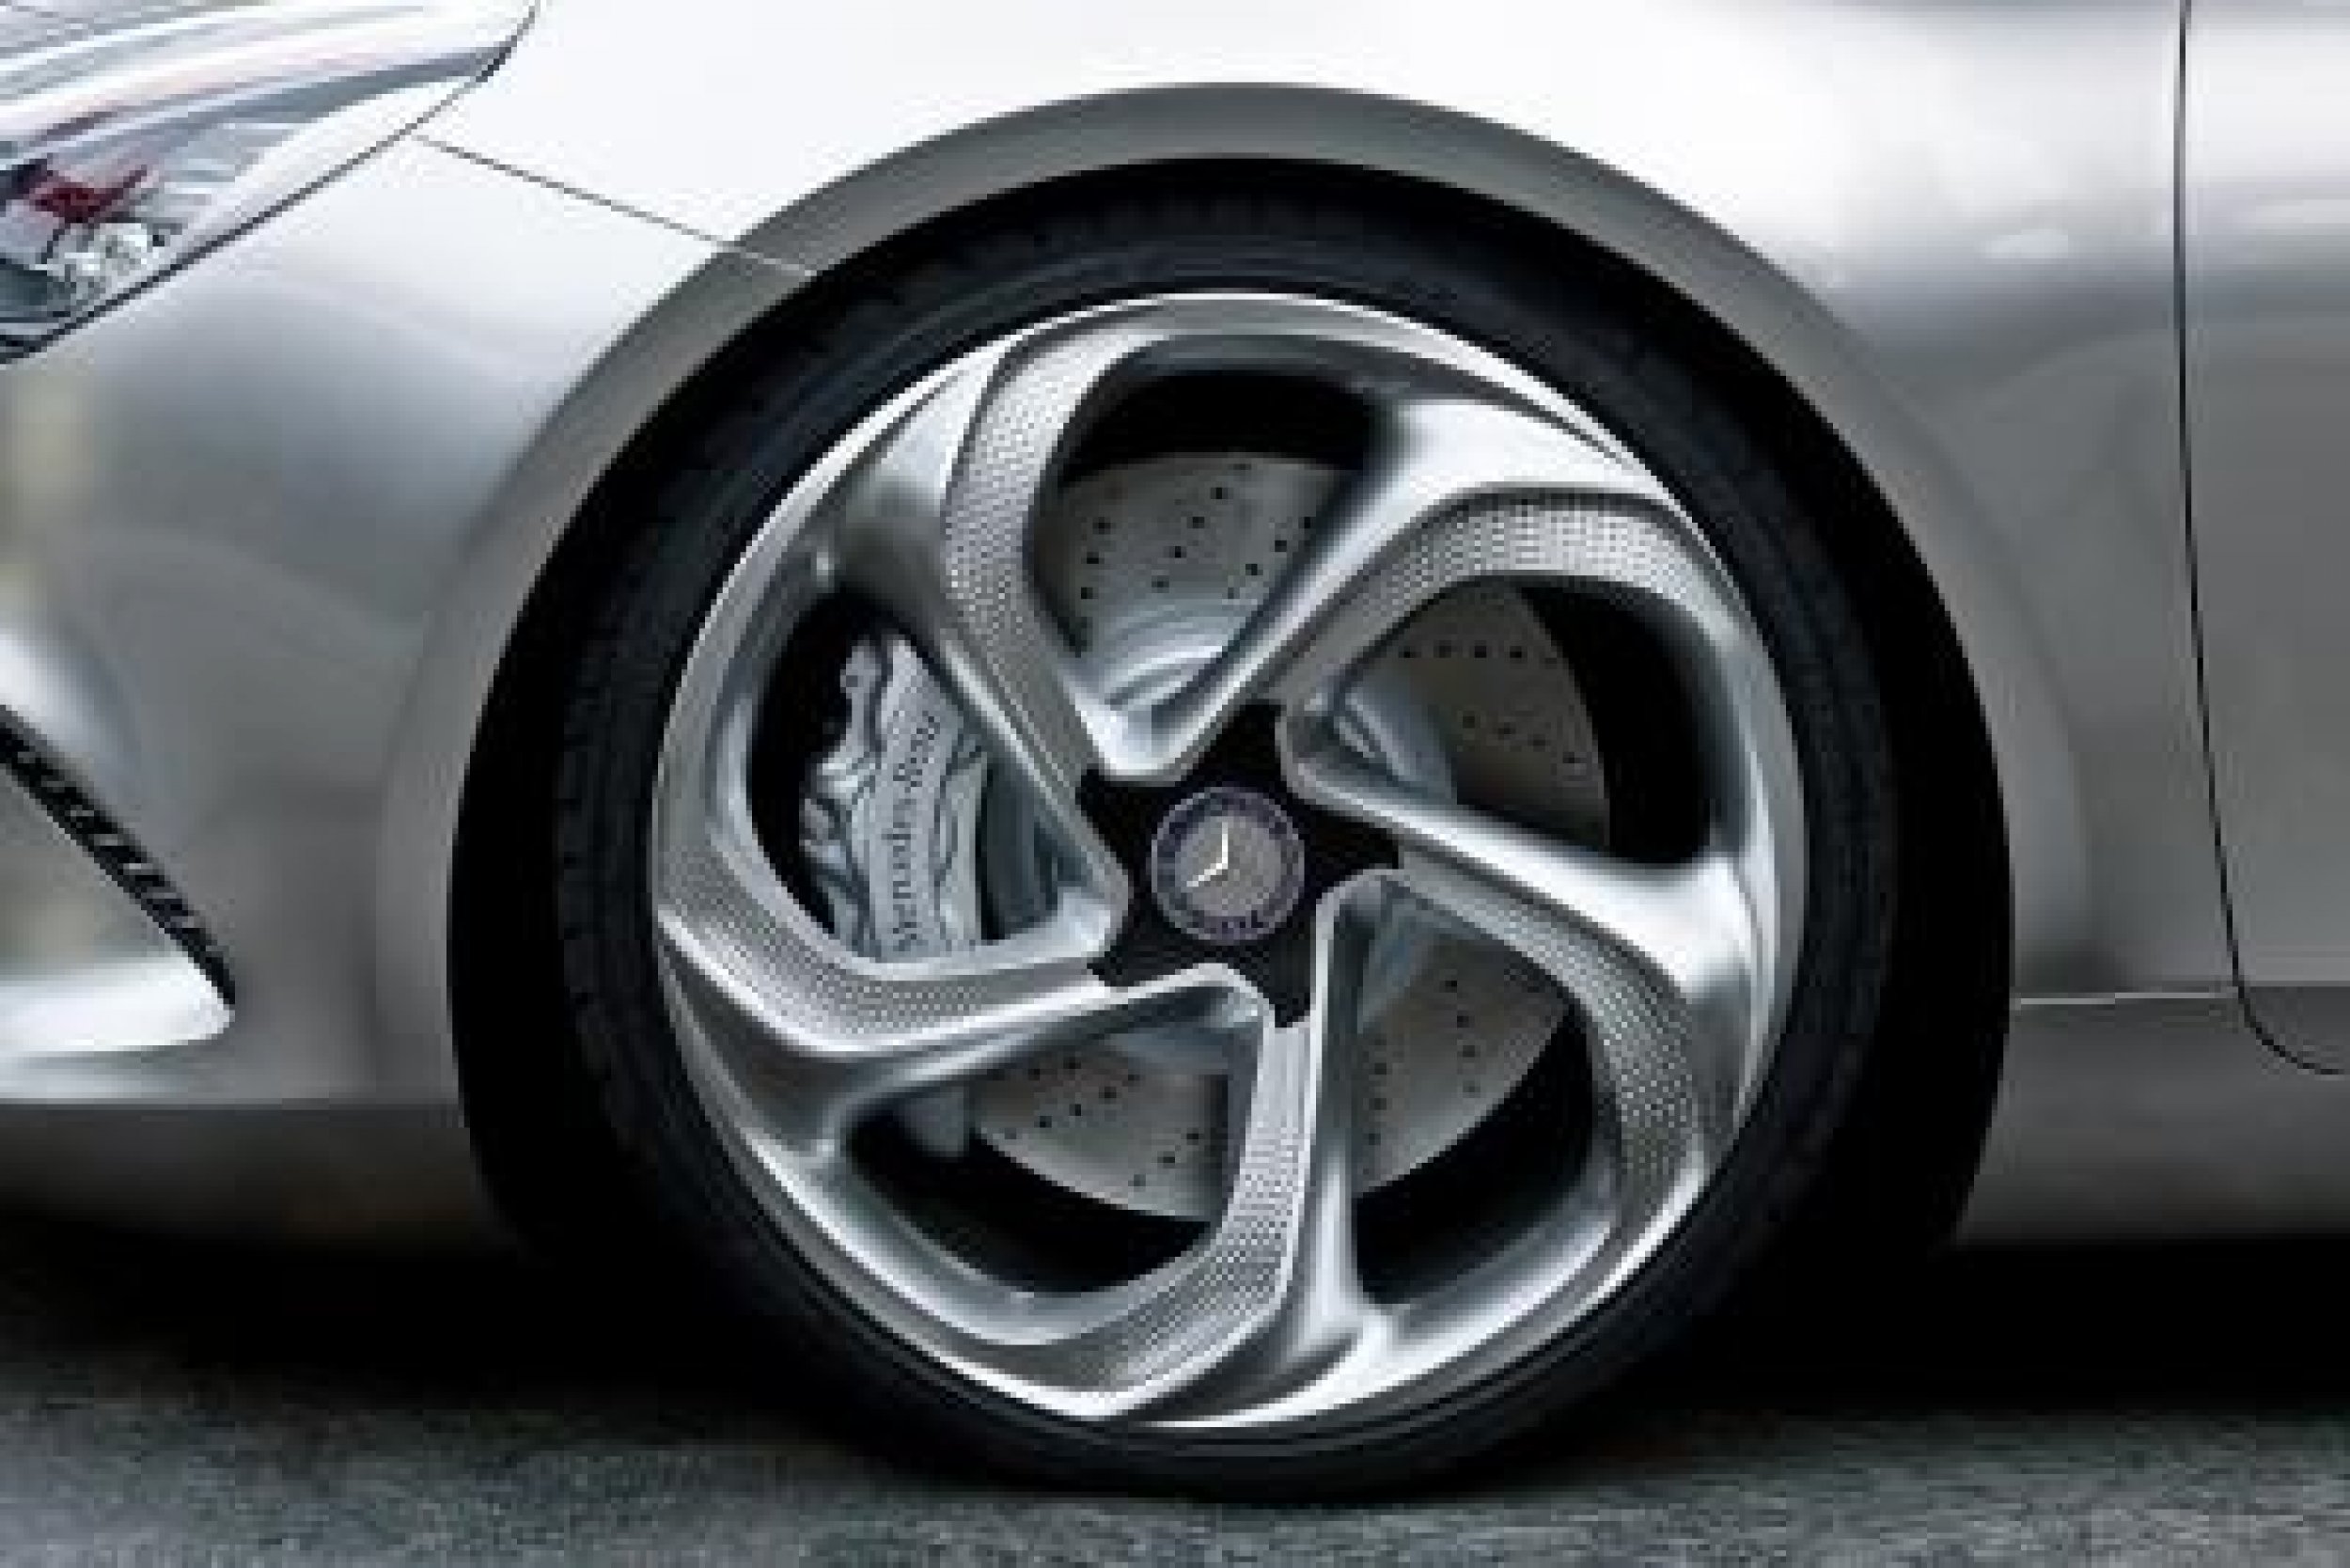 Swoosh go the wheels on the new Mercedes Concept Style Coupe.